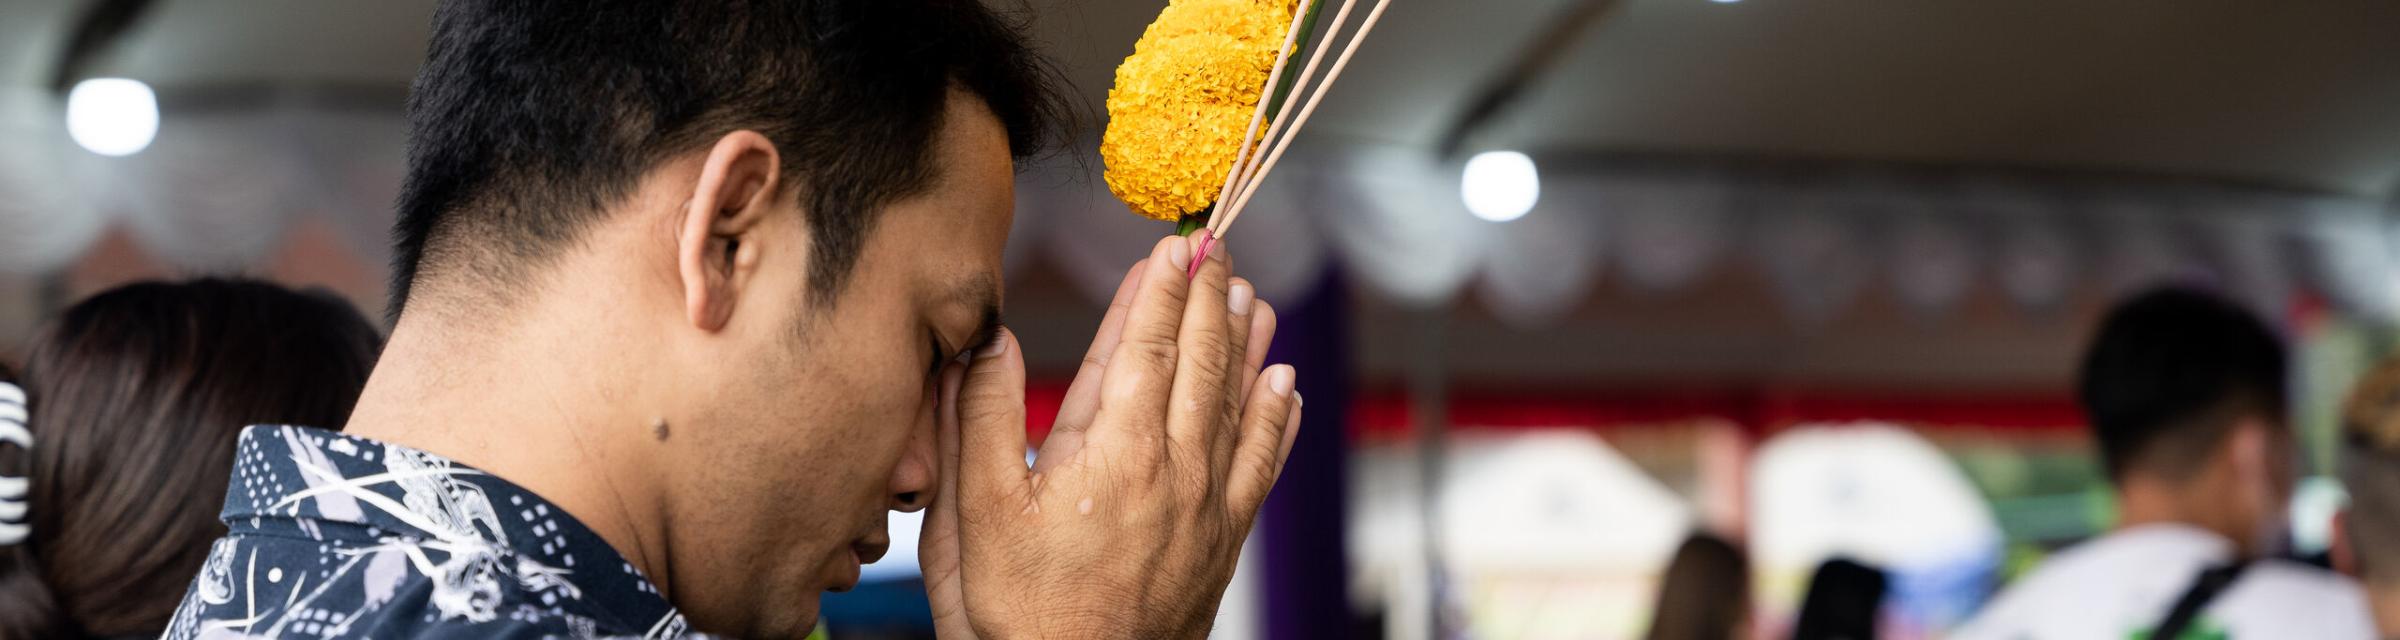 Man holding yellow flowers prays at a Buddhist shrine in Thailand. Photo by RJ Rempel.